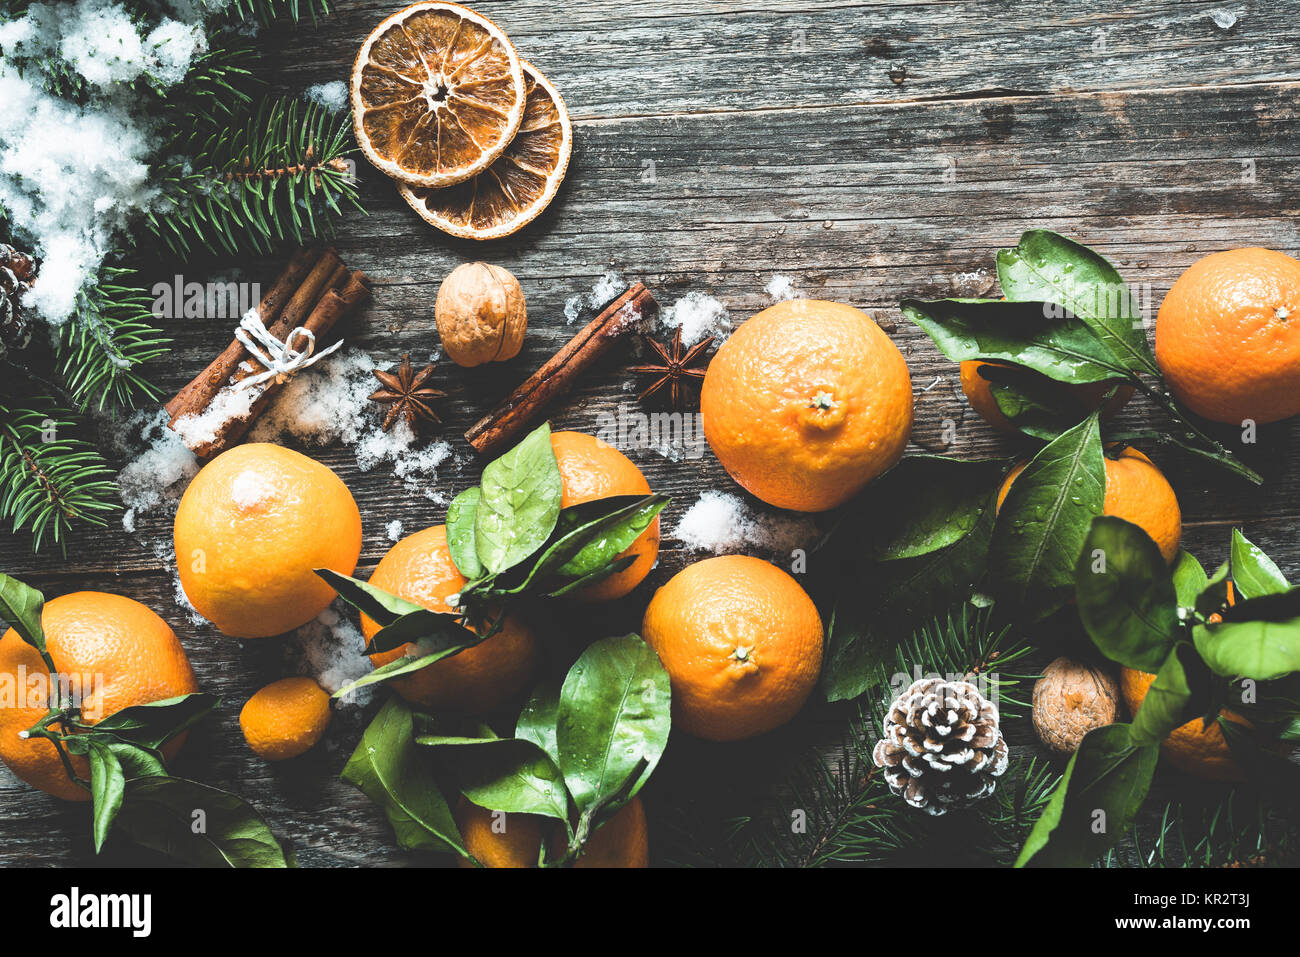 Traditional Christmas background with fir tree, tangerines, cinnamon and natural snow on wooden background. Top view, toned image Stock Photo